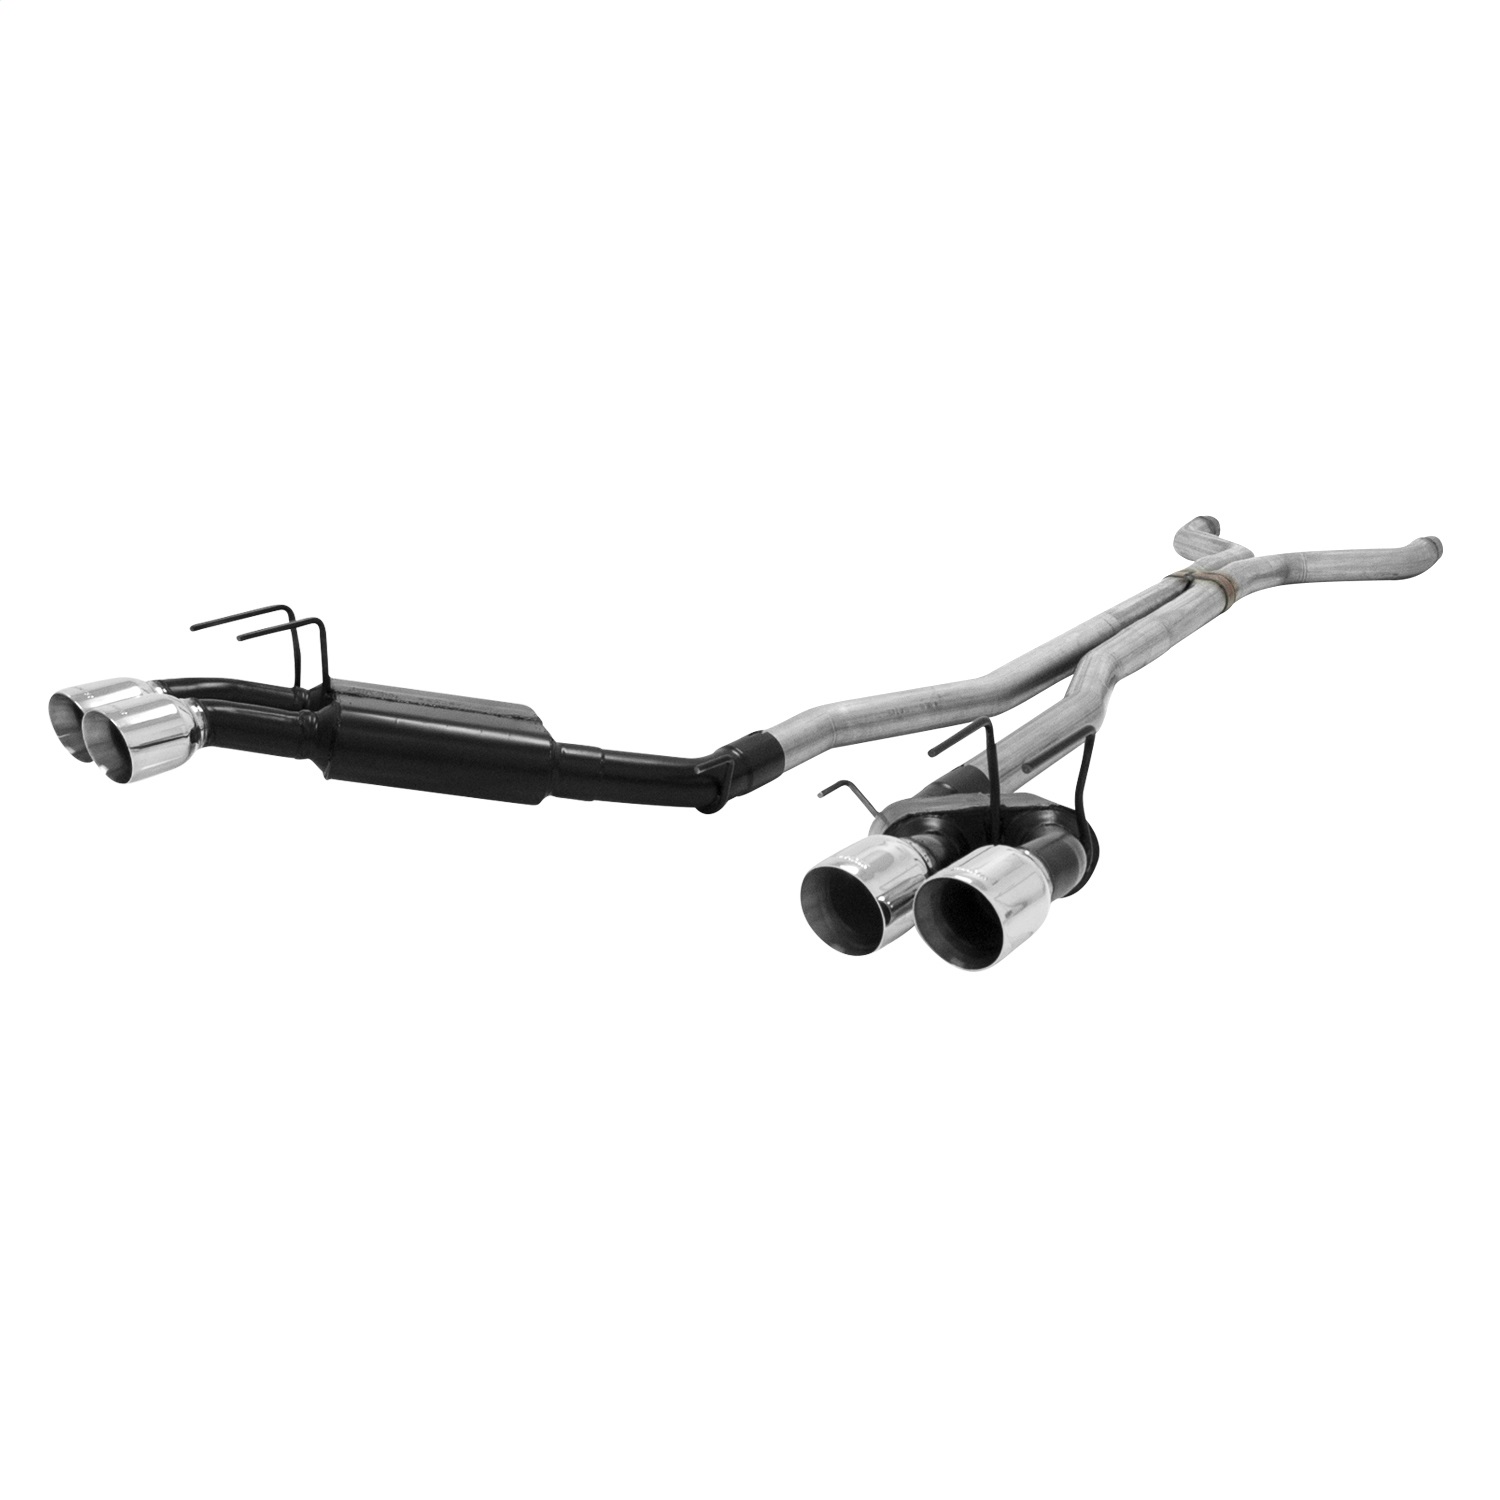 Flowmaster Flowmaster 817609 American Thunder Cat Back Exhaust System Fits 12-15 Camaro